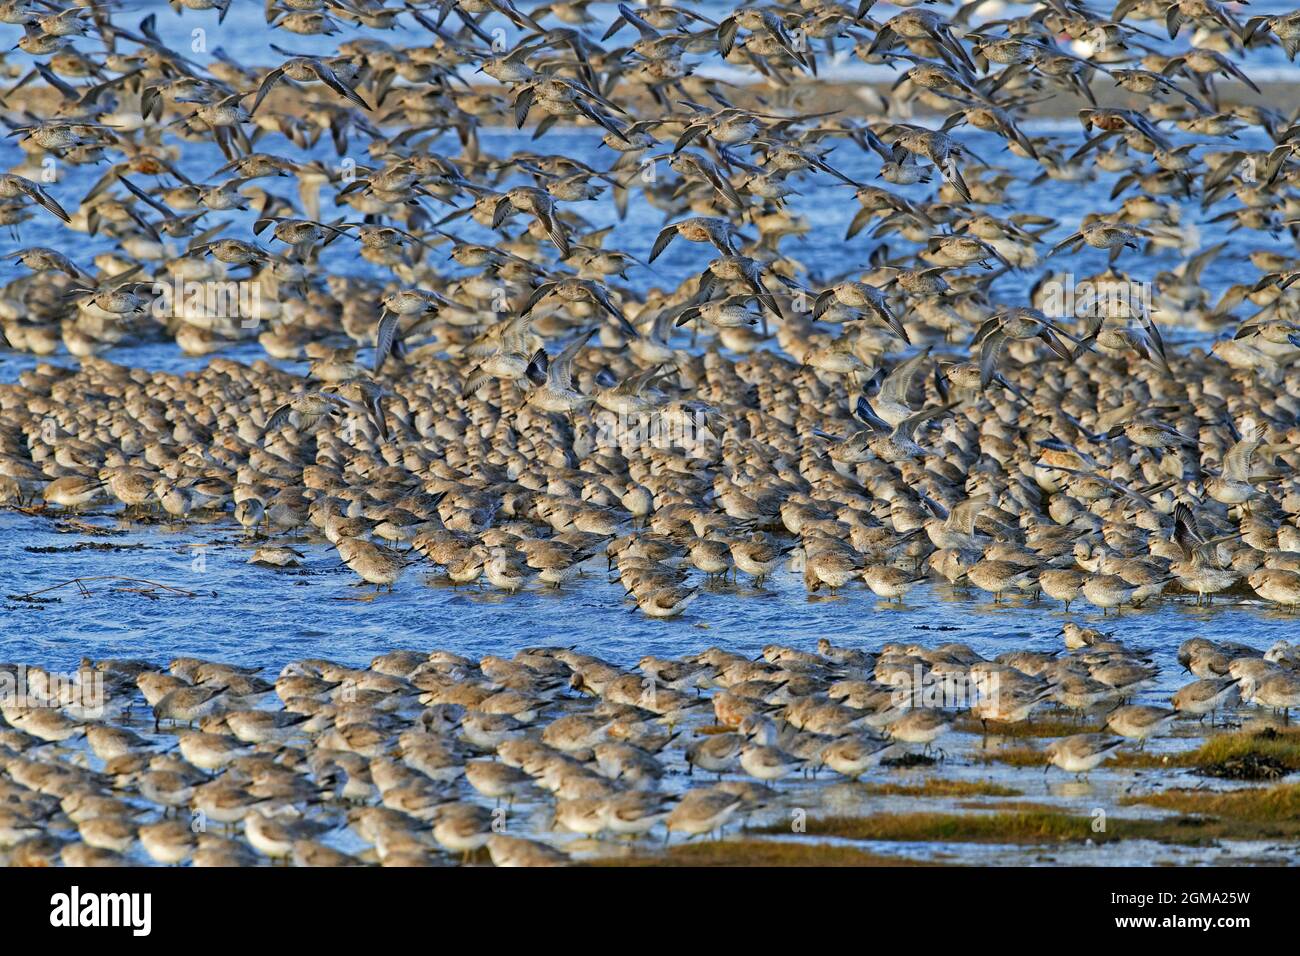 Red knot (Calidris canutus) flock of knots in non-breeding plumage resting on beach along the Schleswig-Holstein Wadden Sea National Park, Germany Stock Photo